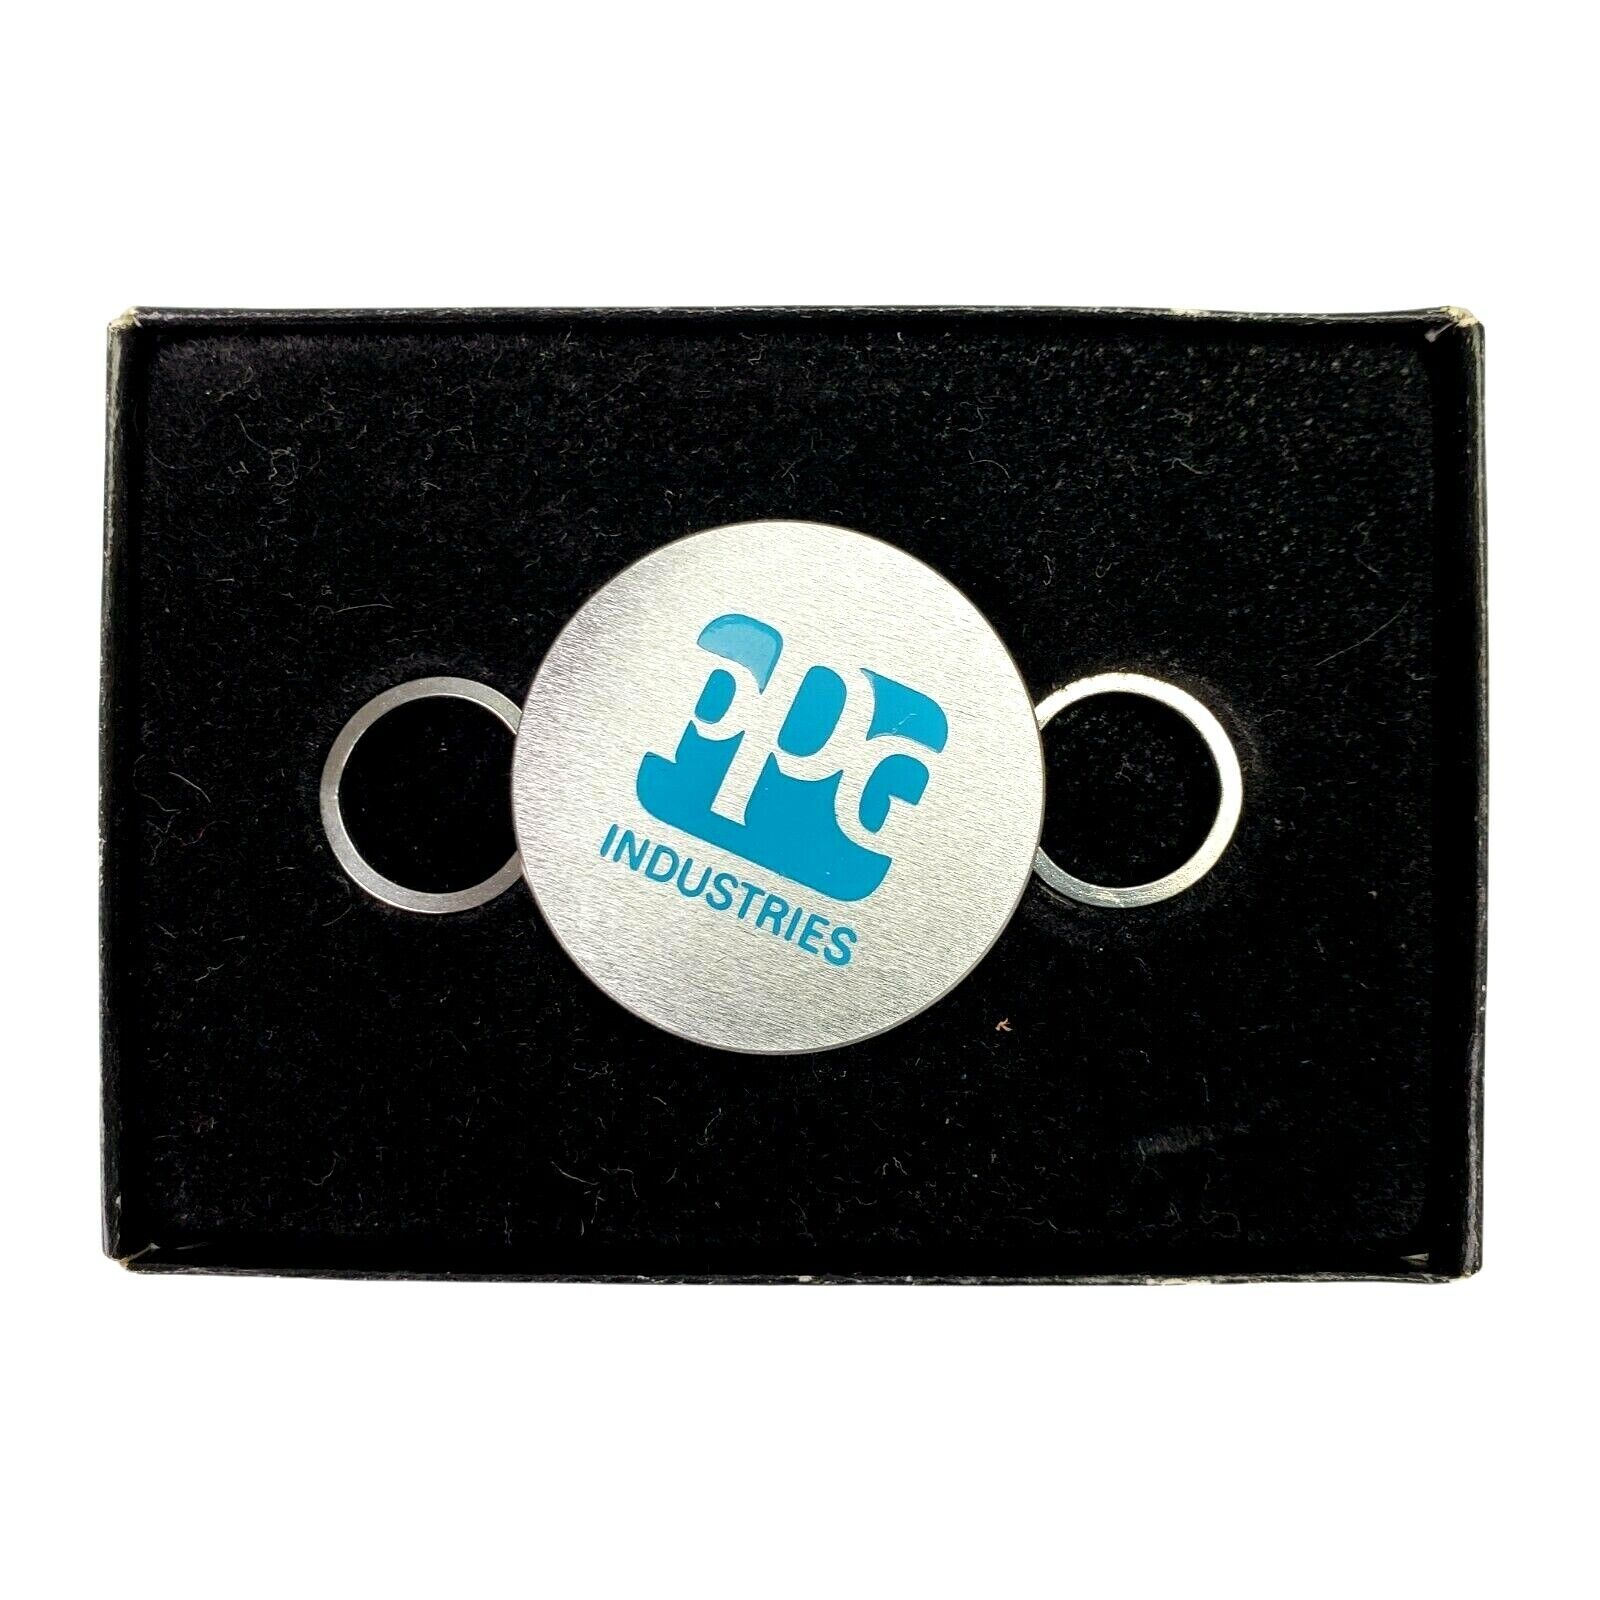 PPG Industries Key Ring Pittsburgh Plate Glass Advertising Ad Logo New in Box